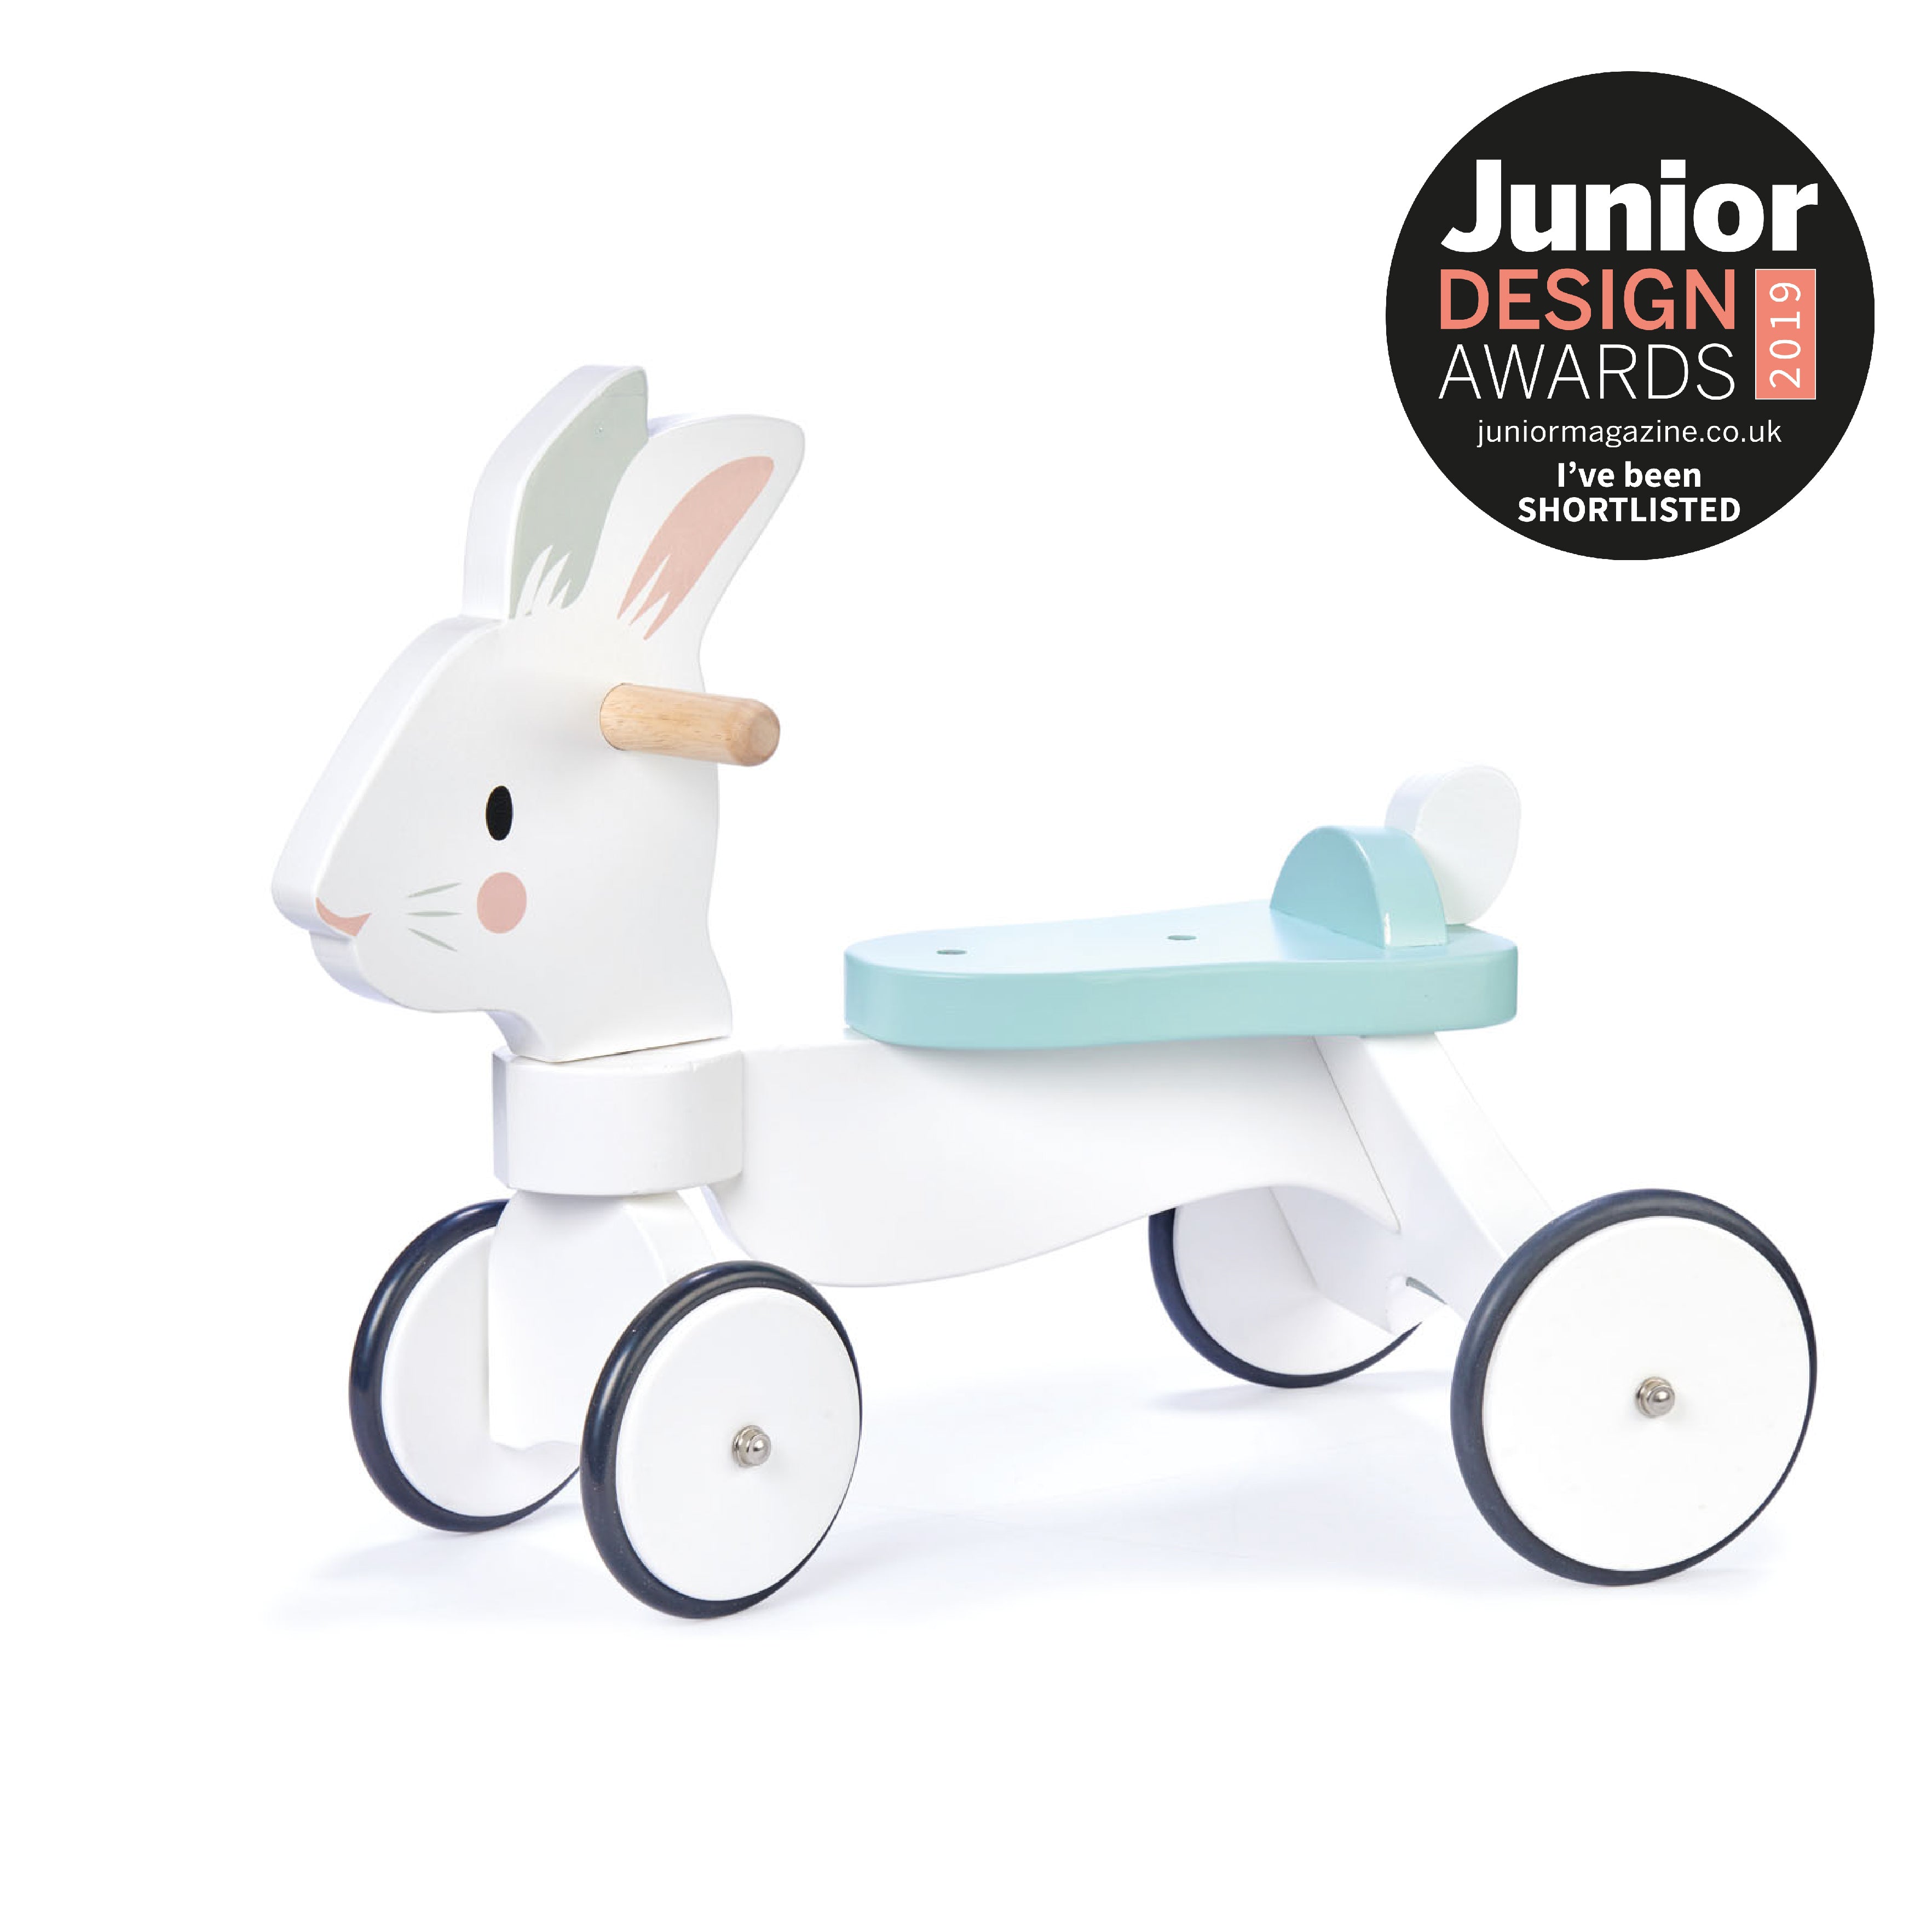 Explore the Tender Leaf Toys Running Rabbit Ride-On, a 2019 Junior Design Awards finalist. This sturdy, white bunny ride-on boasts non-slip rubber-trimmed wheels and is crafted from sustainably sourced rubberwood, rigorously tested for stability